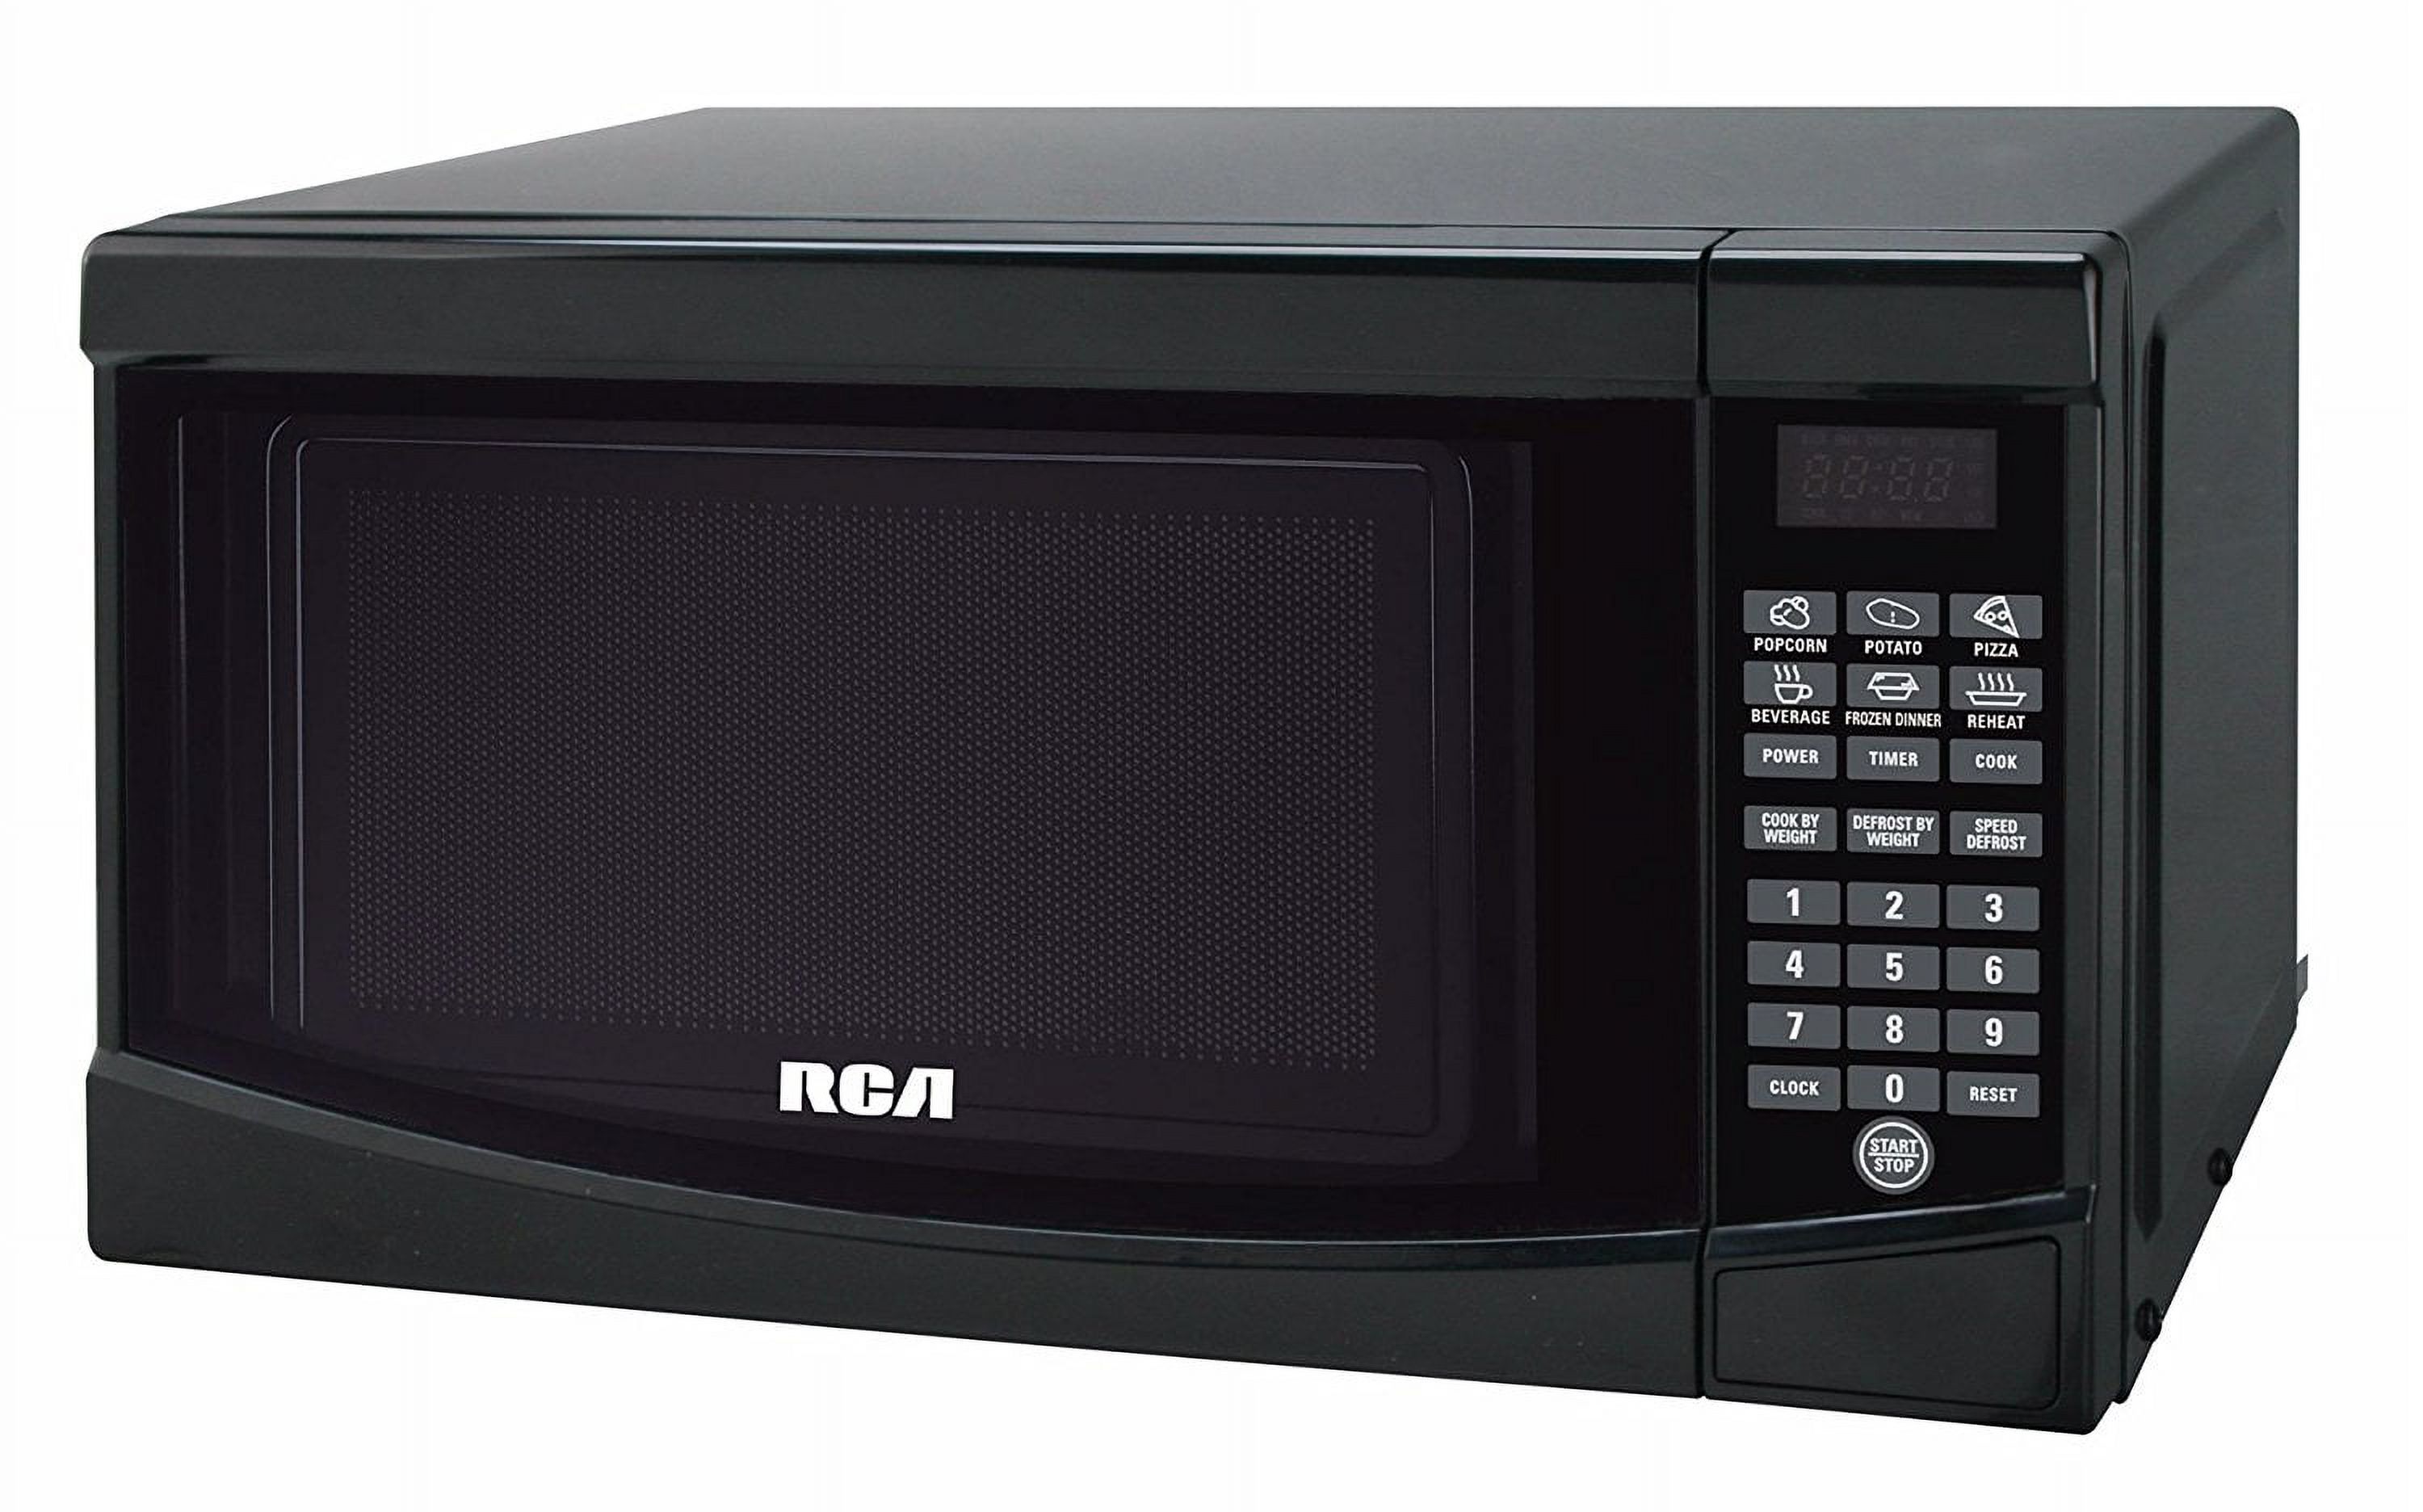 RCA 0.7 Cu. ft. New Countertop Microwave Oven - Black - image 2 of 3